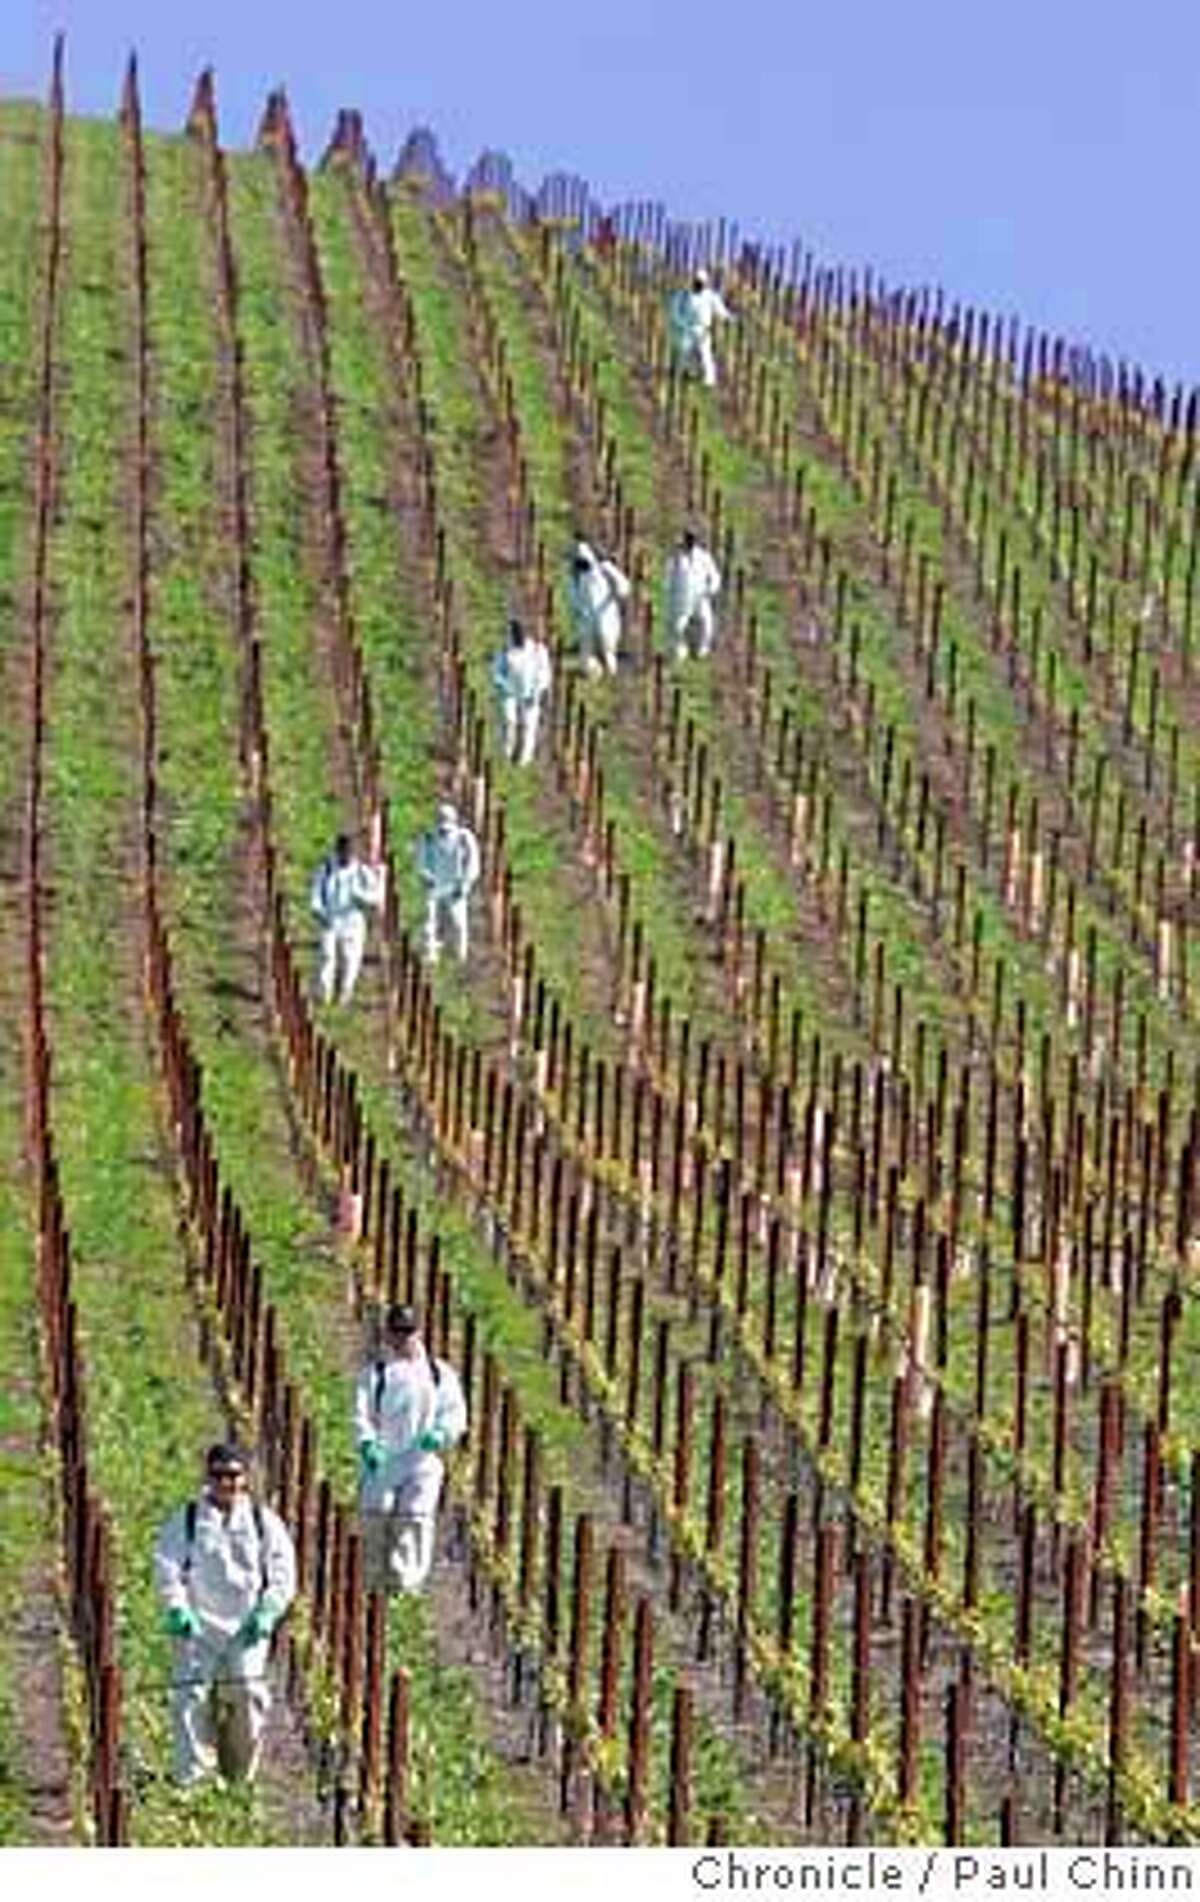 verticalvineyard_107_pc.jpg Clos de la Tech Winery on 4/15/05 in La Honda, CA. Bankrolled by Cypress Semiconductor's TJ Rodgers and his partner Valeta Massey, the vineyard is laid out on an incredibly steep slope on Langley Hill. But some of the vineyard's steepest slopes lie directly above La Honda's sole year-round water supply and residents there worry that a landslide could wipe out their lifeline. PAUL CHINN/The Chronicle MANDATORY CREDIT FOR PHOTOG AND S.F. CHRONICLE/ - MAGS OUT